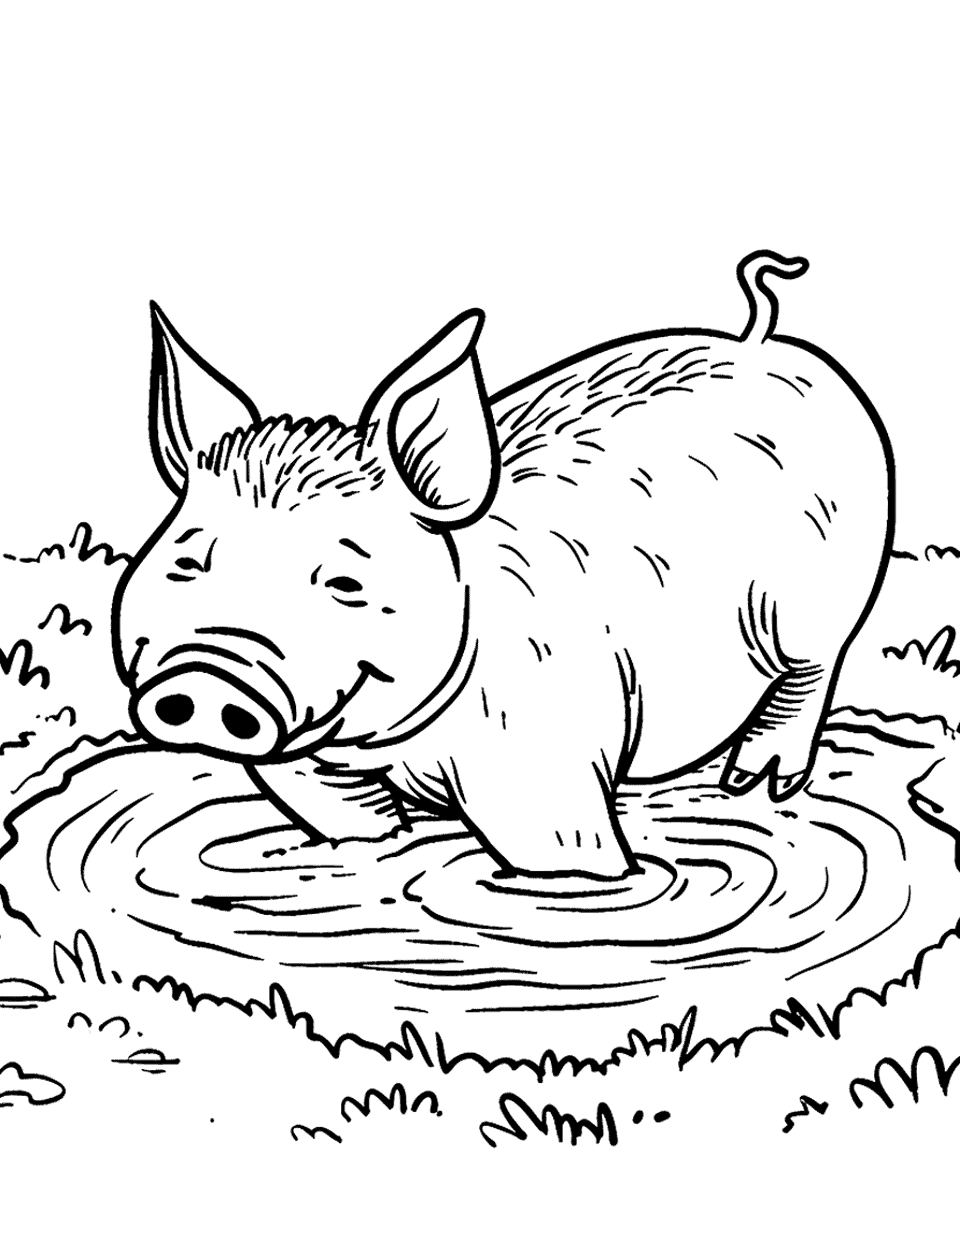 Pig Rolling in Mud Farm Animal Coloring Page - A happy pig rolling around in a big mud puddle with a satisfied expression.